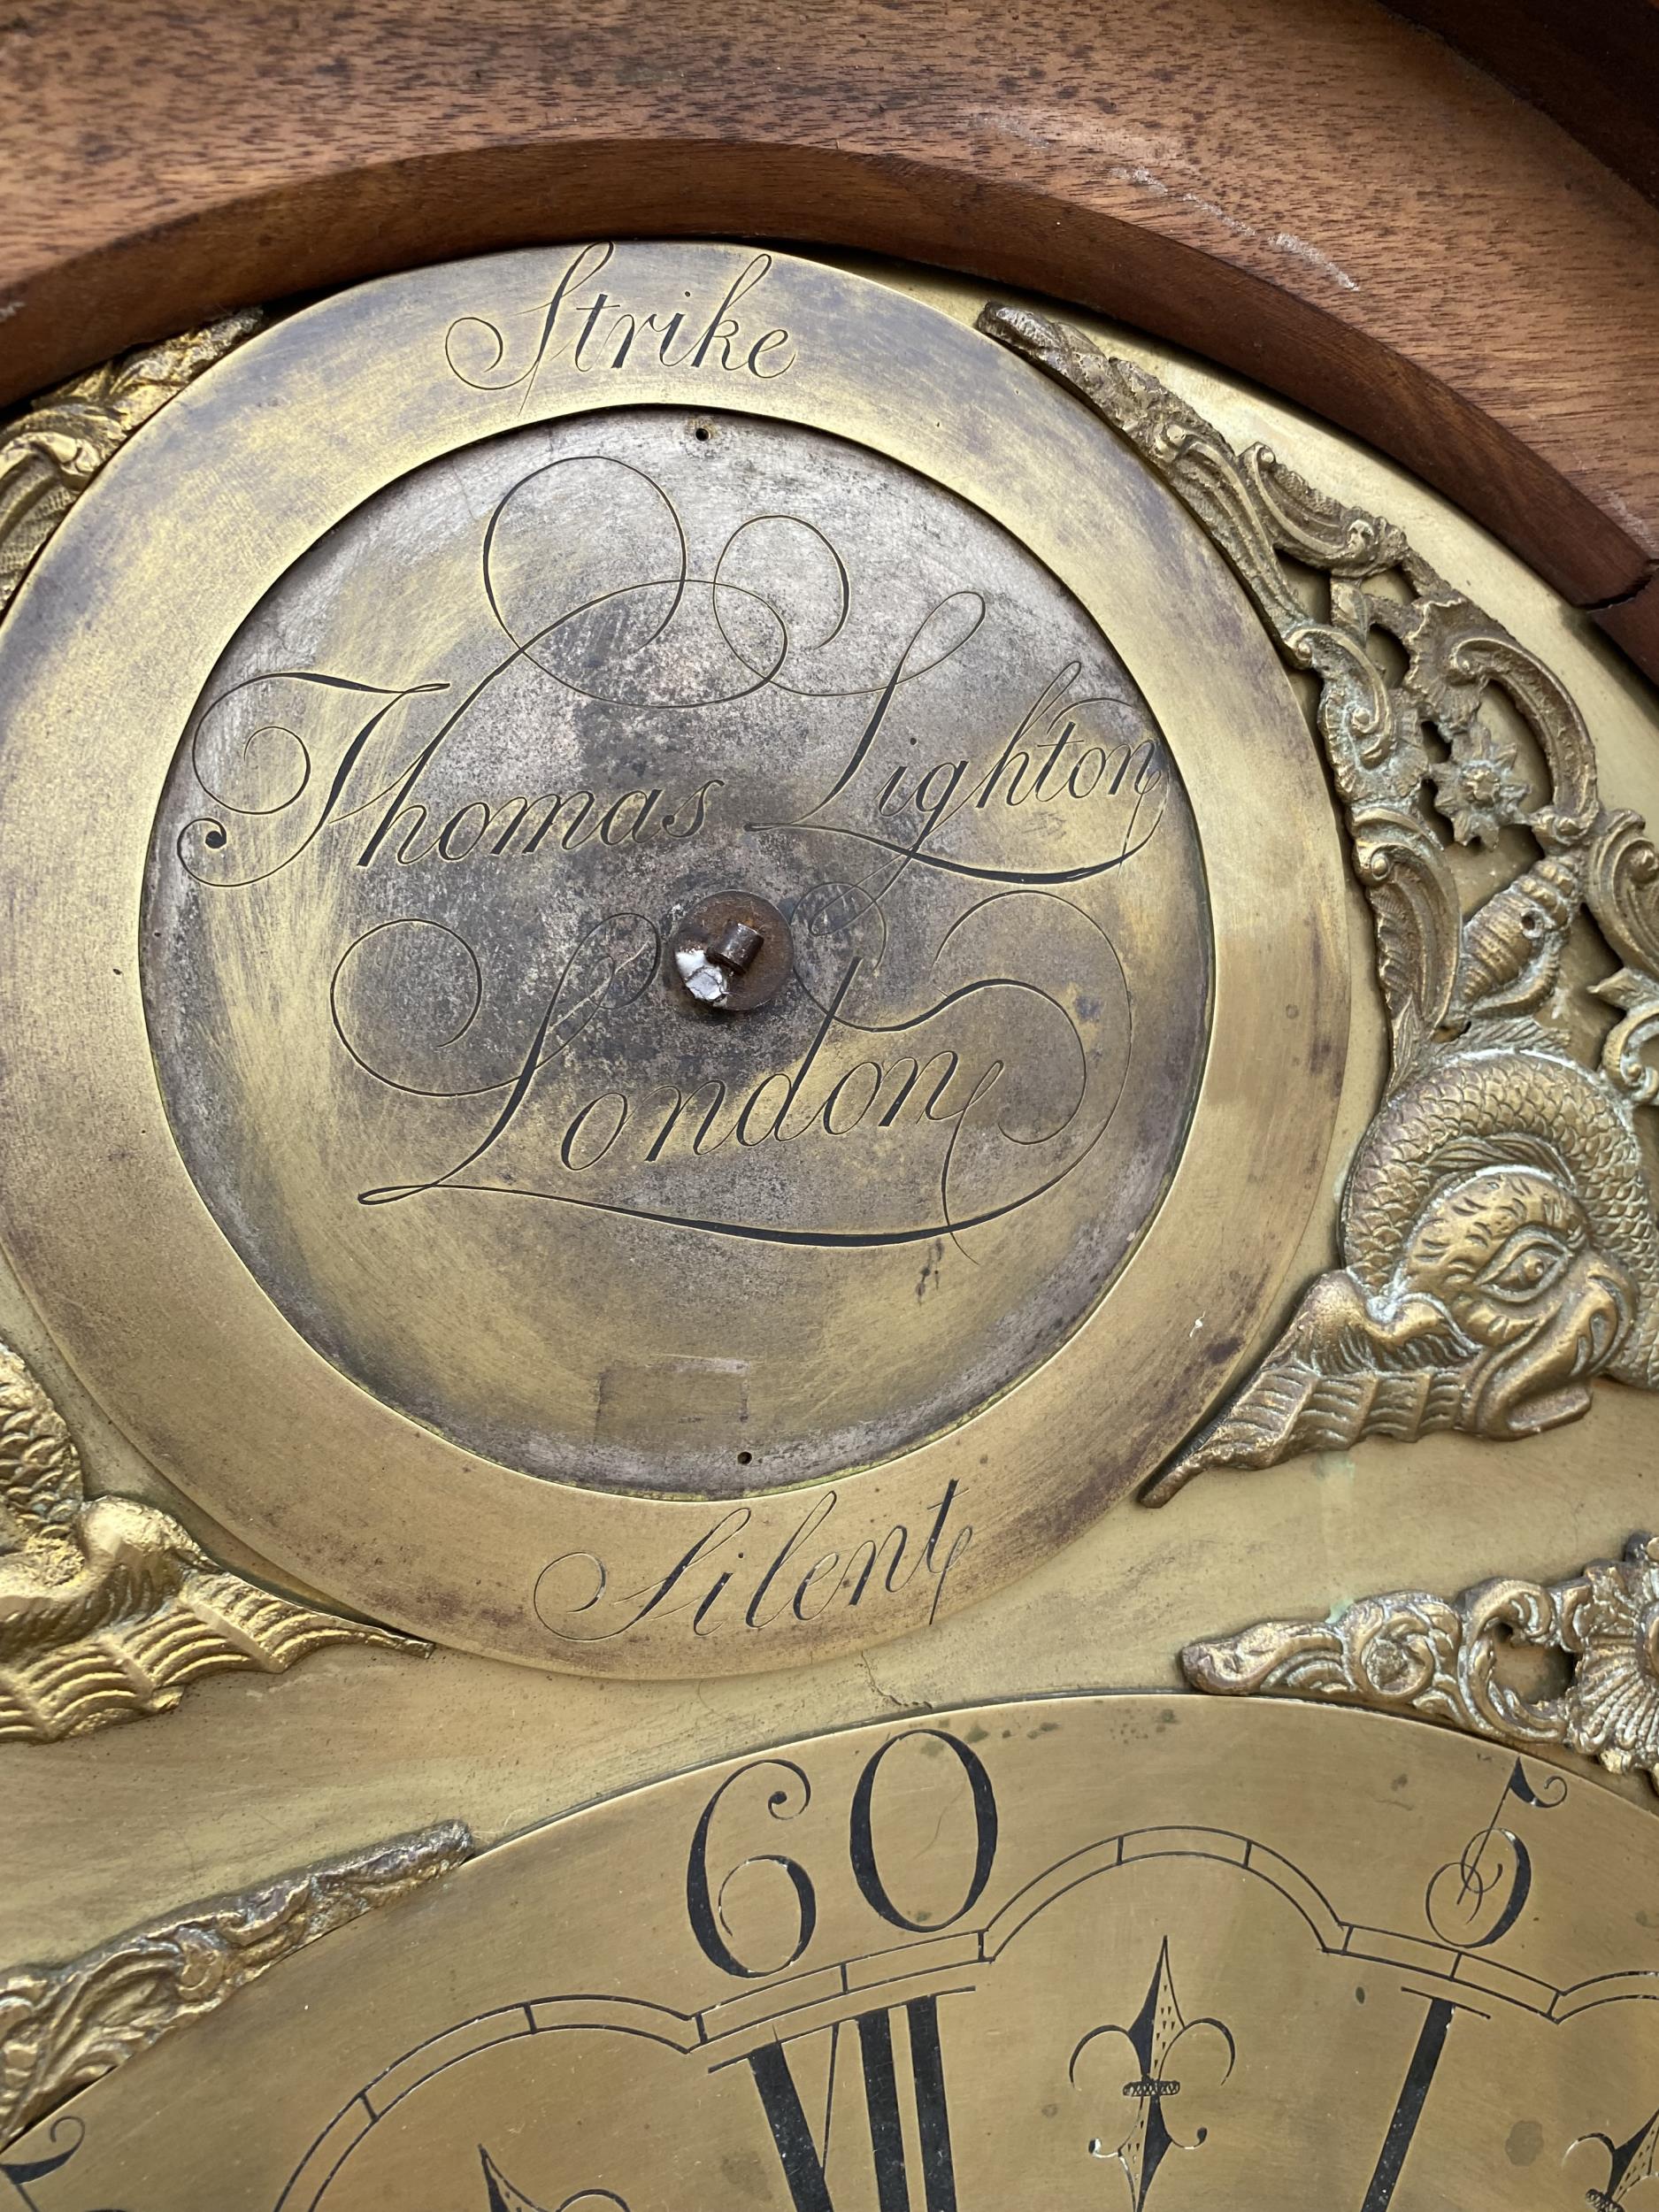 AN 18TH CENTURY MAHOGANY EIGHT-DAY LONGCASE CLOCK WITH BRASS FACE AND INLAID OVALS DEPICTING BIRDS - Image 7 of 12